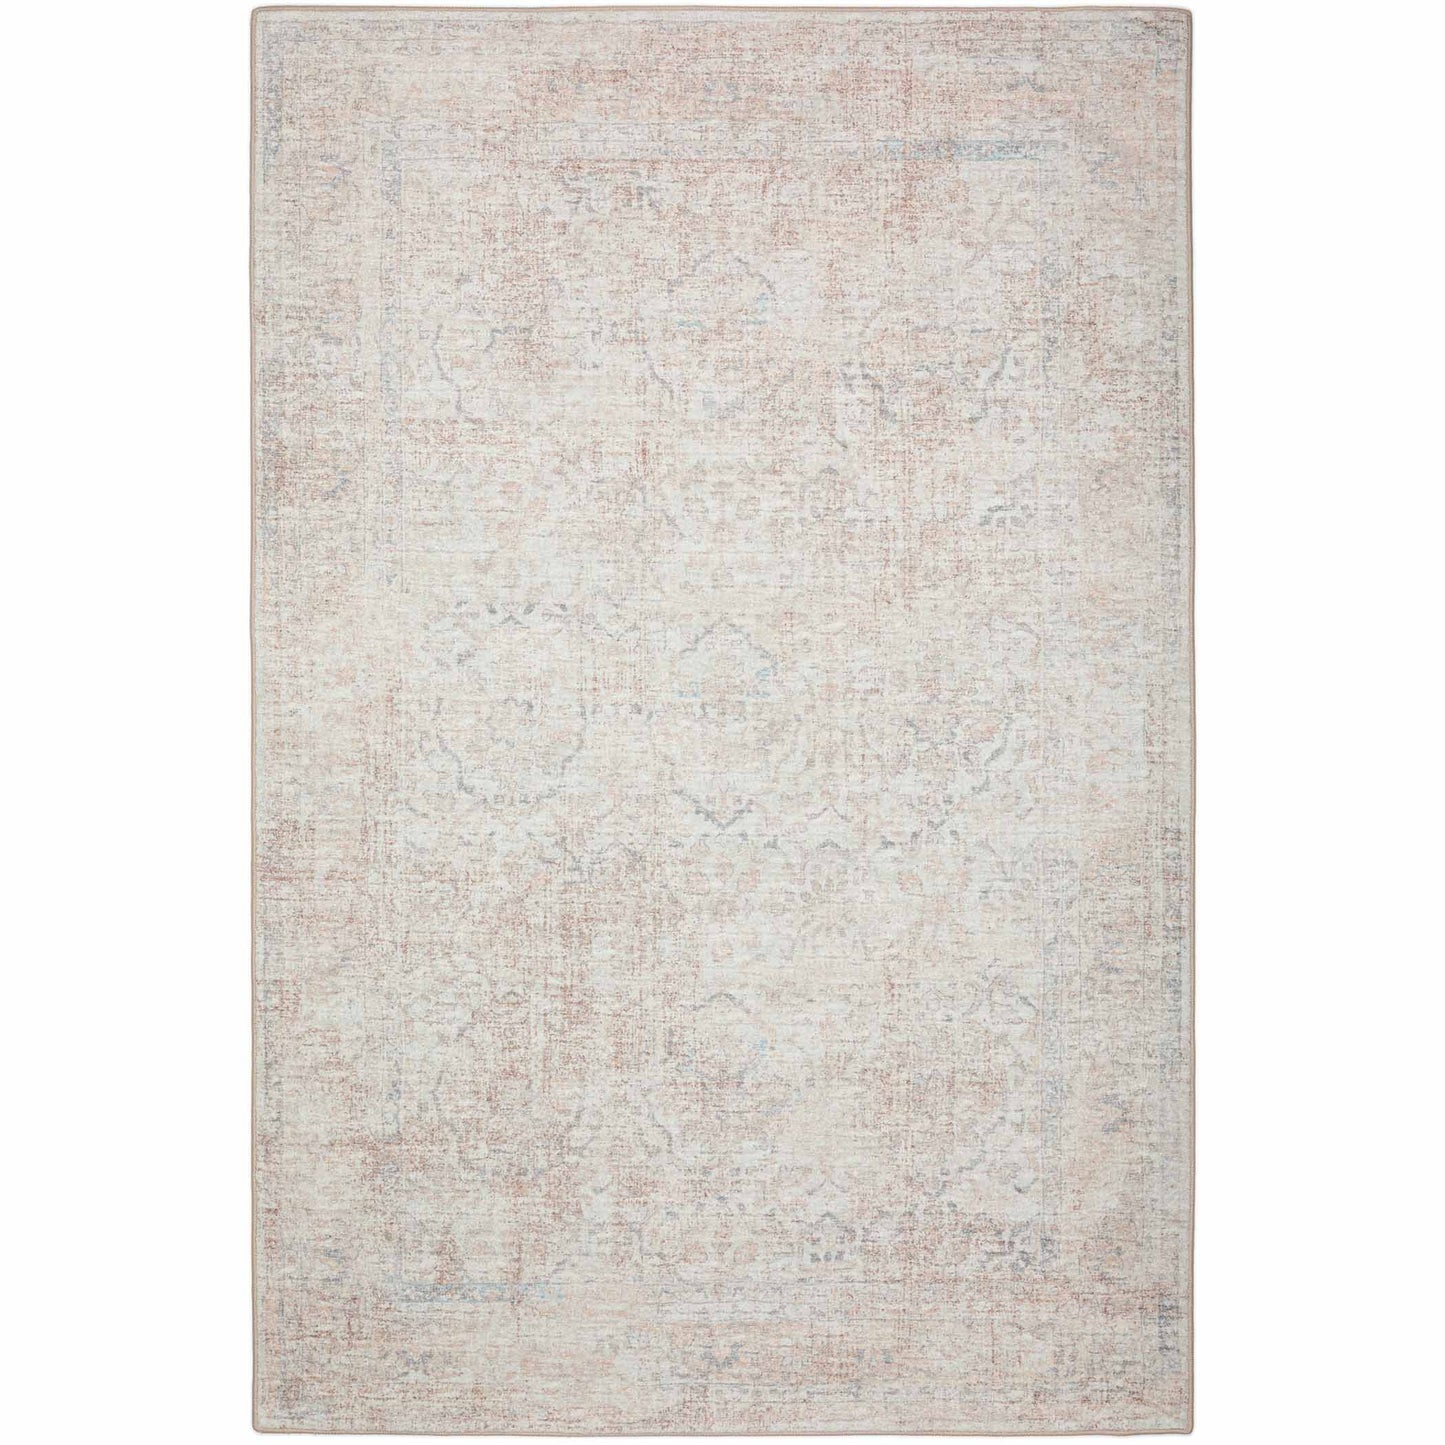 Dalyn Rugs Jericho JC3 Pearl Transitional Tufted Rug